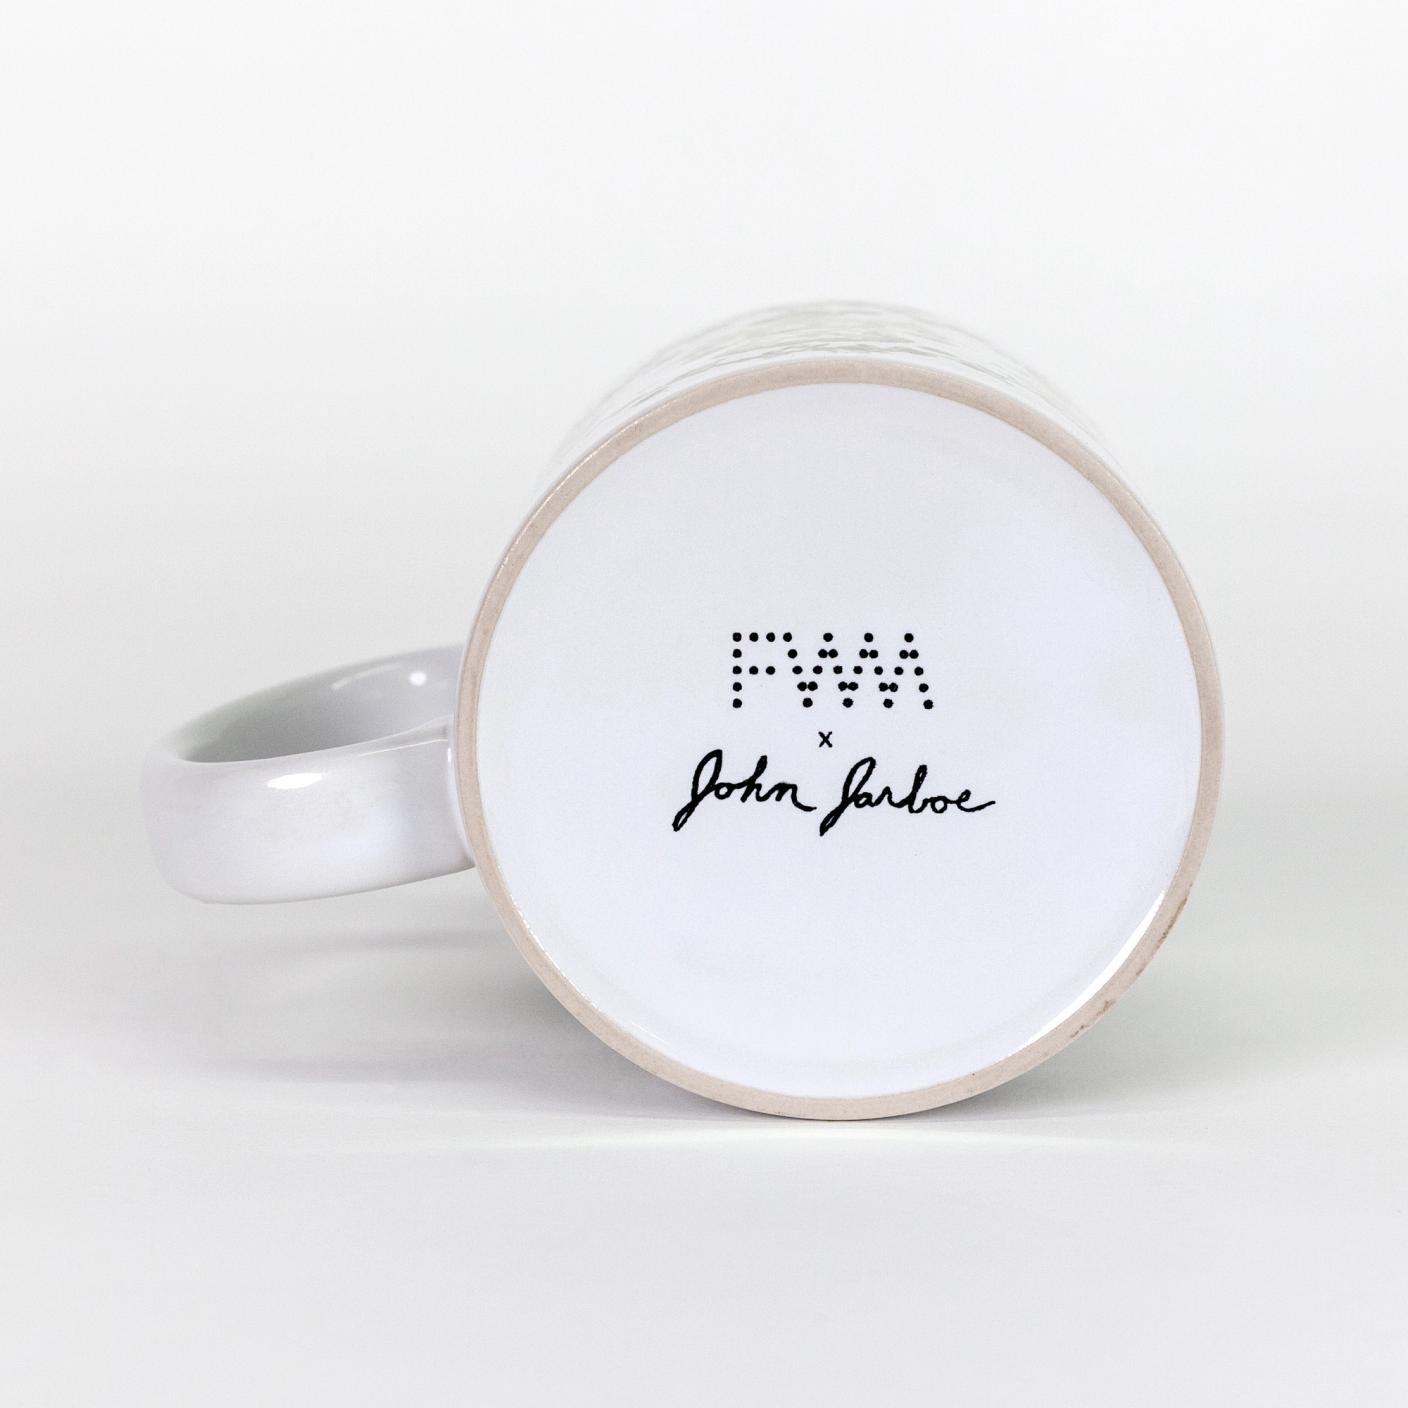 The bottom of a white ceramic mug. In black, in the center is the dotted logo for The Fabric Workshop and Museum with John Jarboe's signature below the logo. The text reads "FWM x John Jarboe"